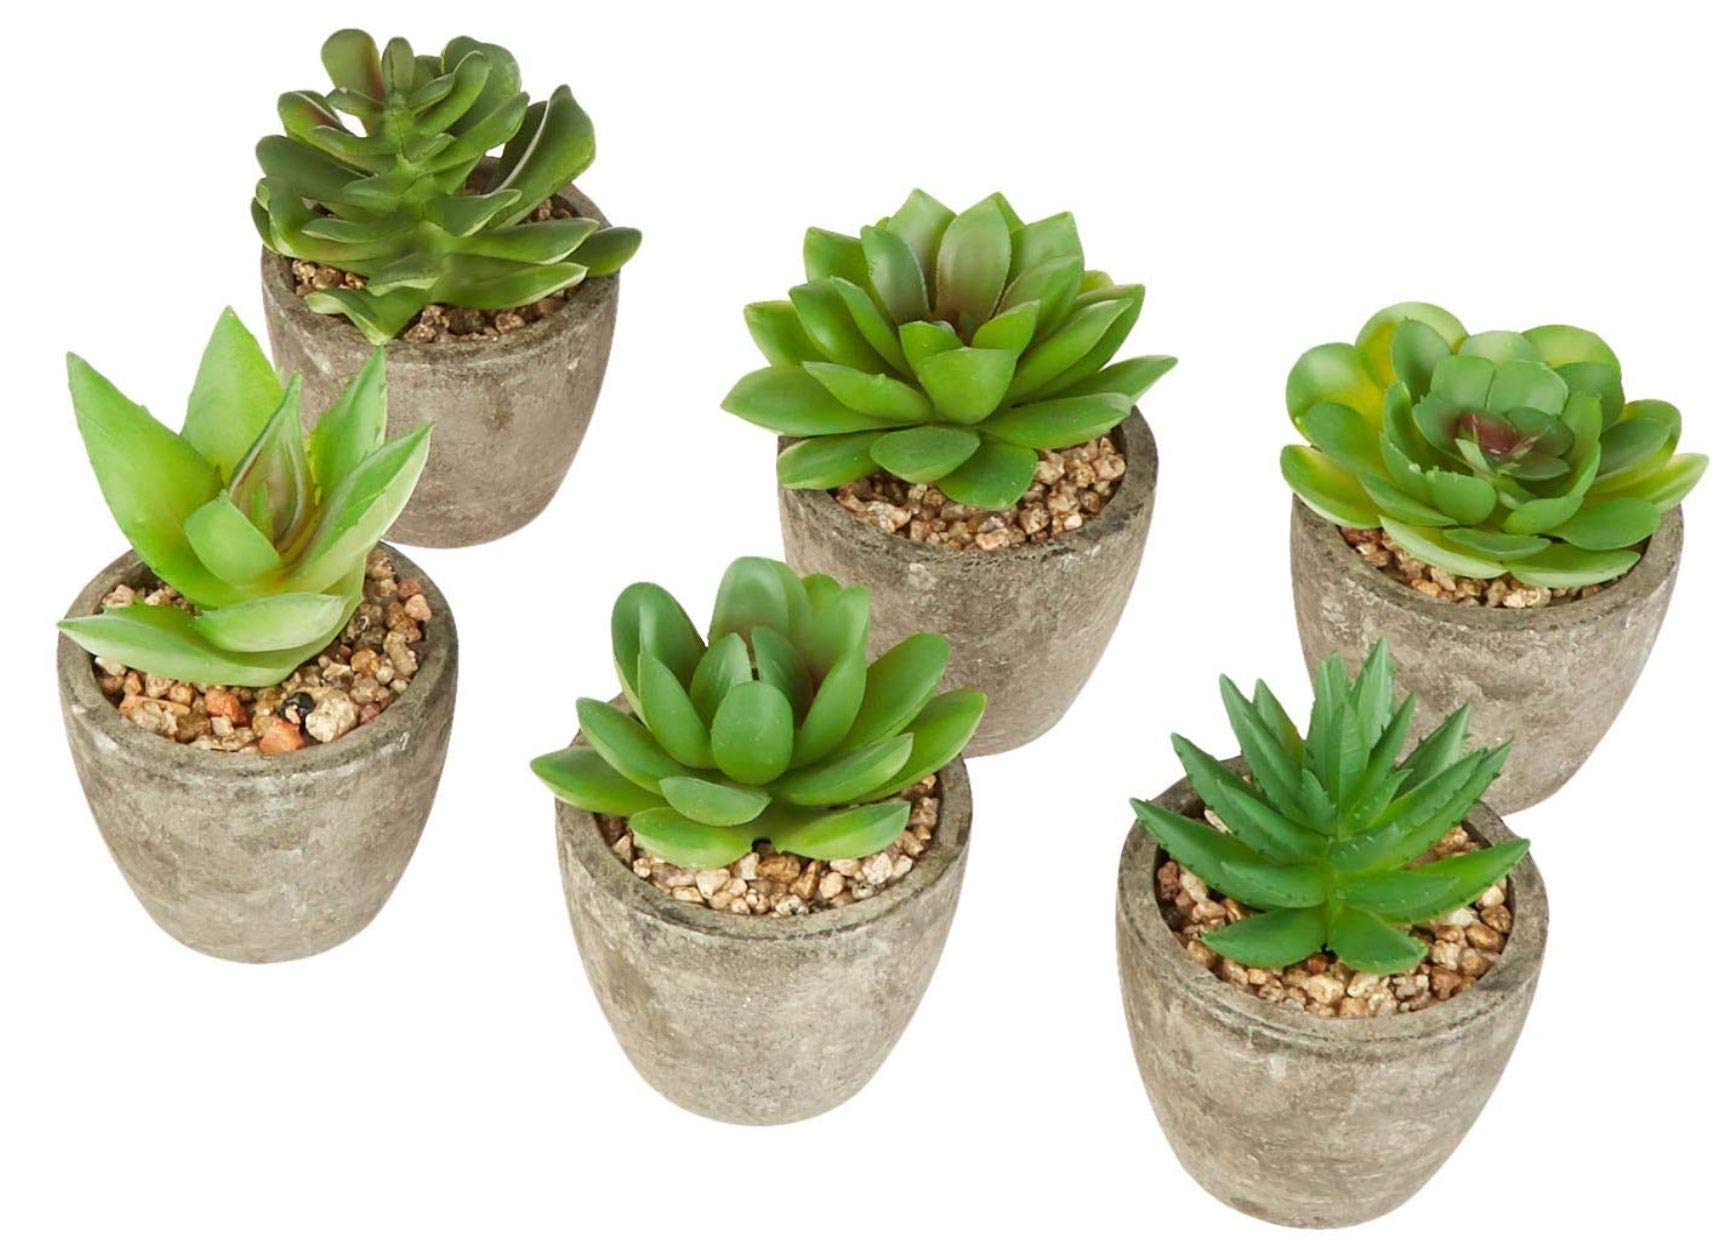 Book Cover DuraBear Artificial Succulent Plants for Home Or Office | Set of 6 Fake Succulent Plants in Pots | Realistic Look and Feel Faux Succulents | Mini Succulent Plants | Faux Plant Succulent Decor